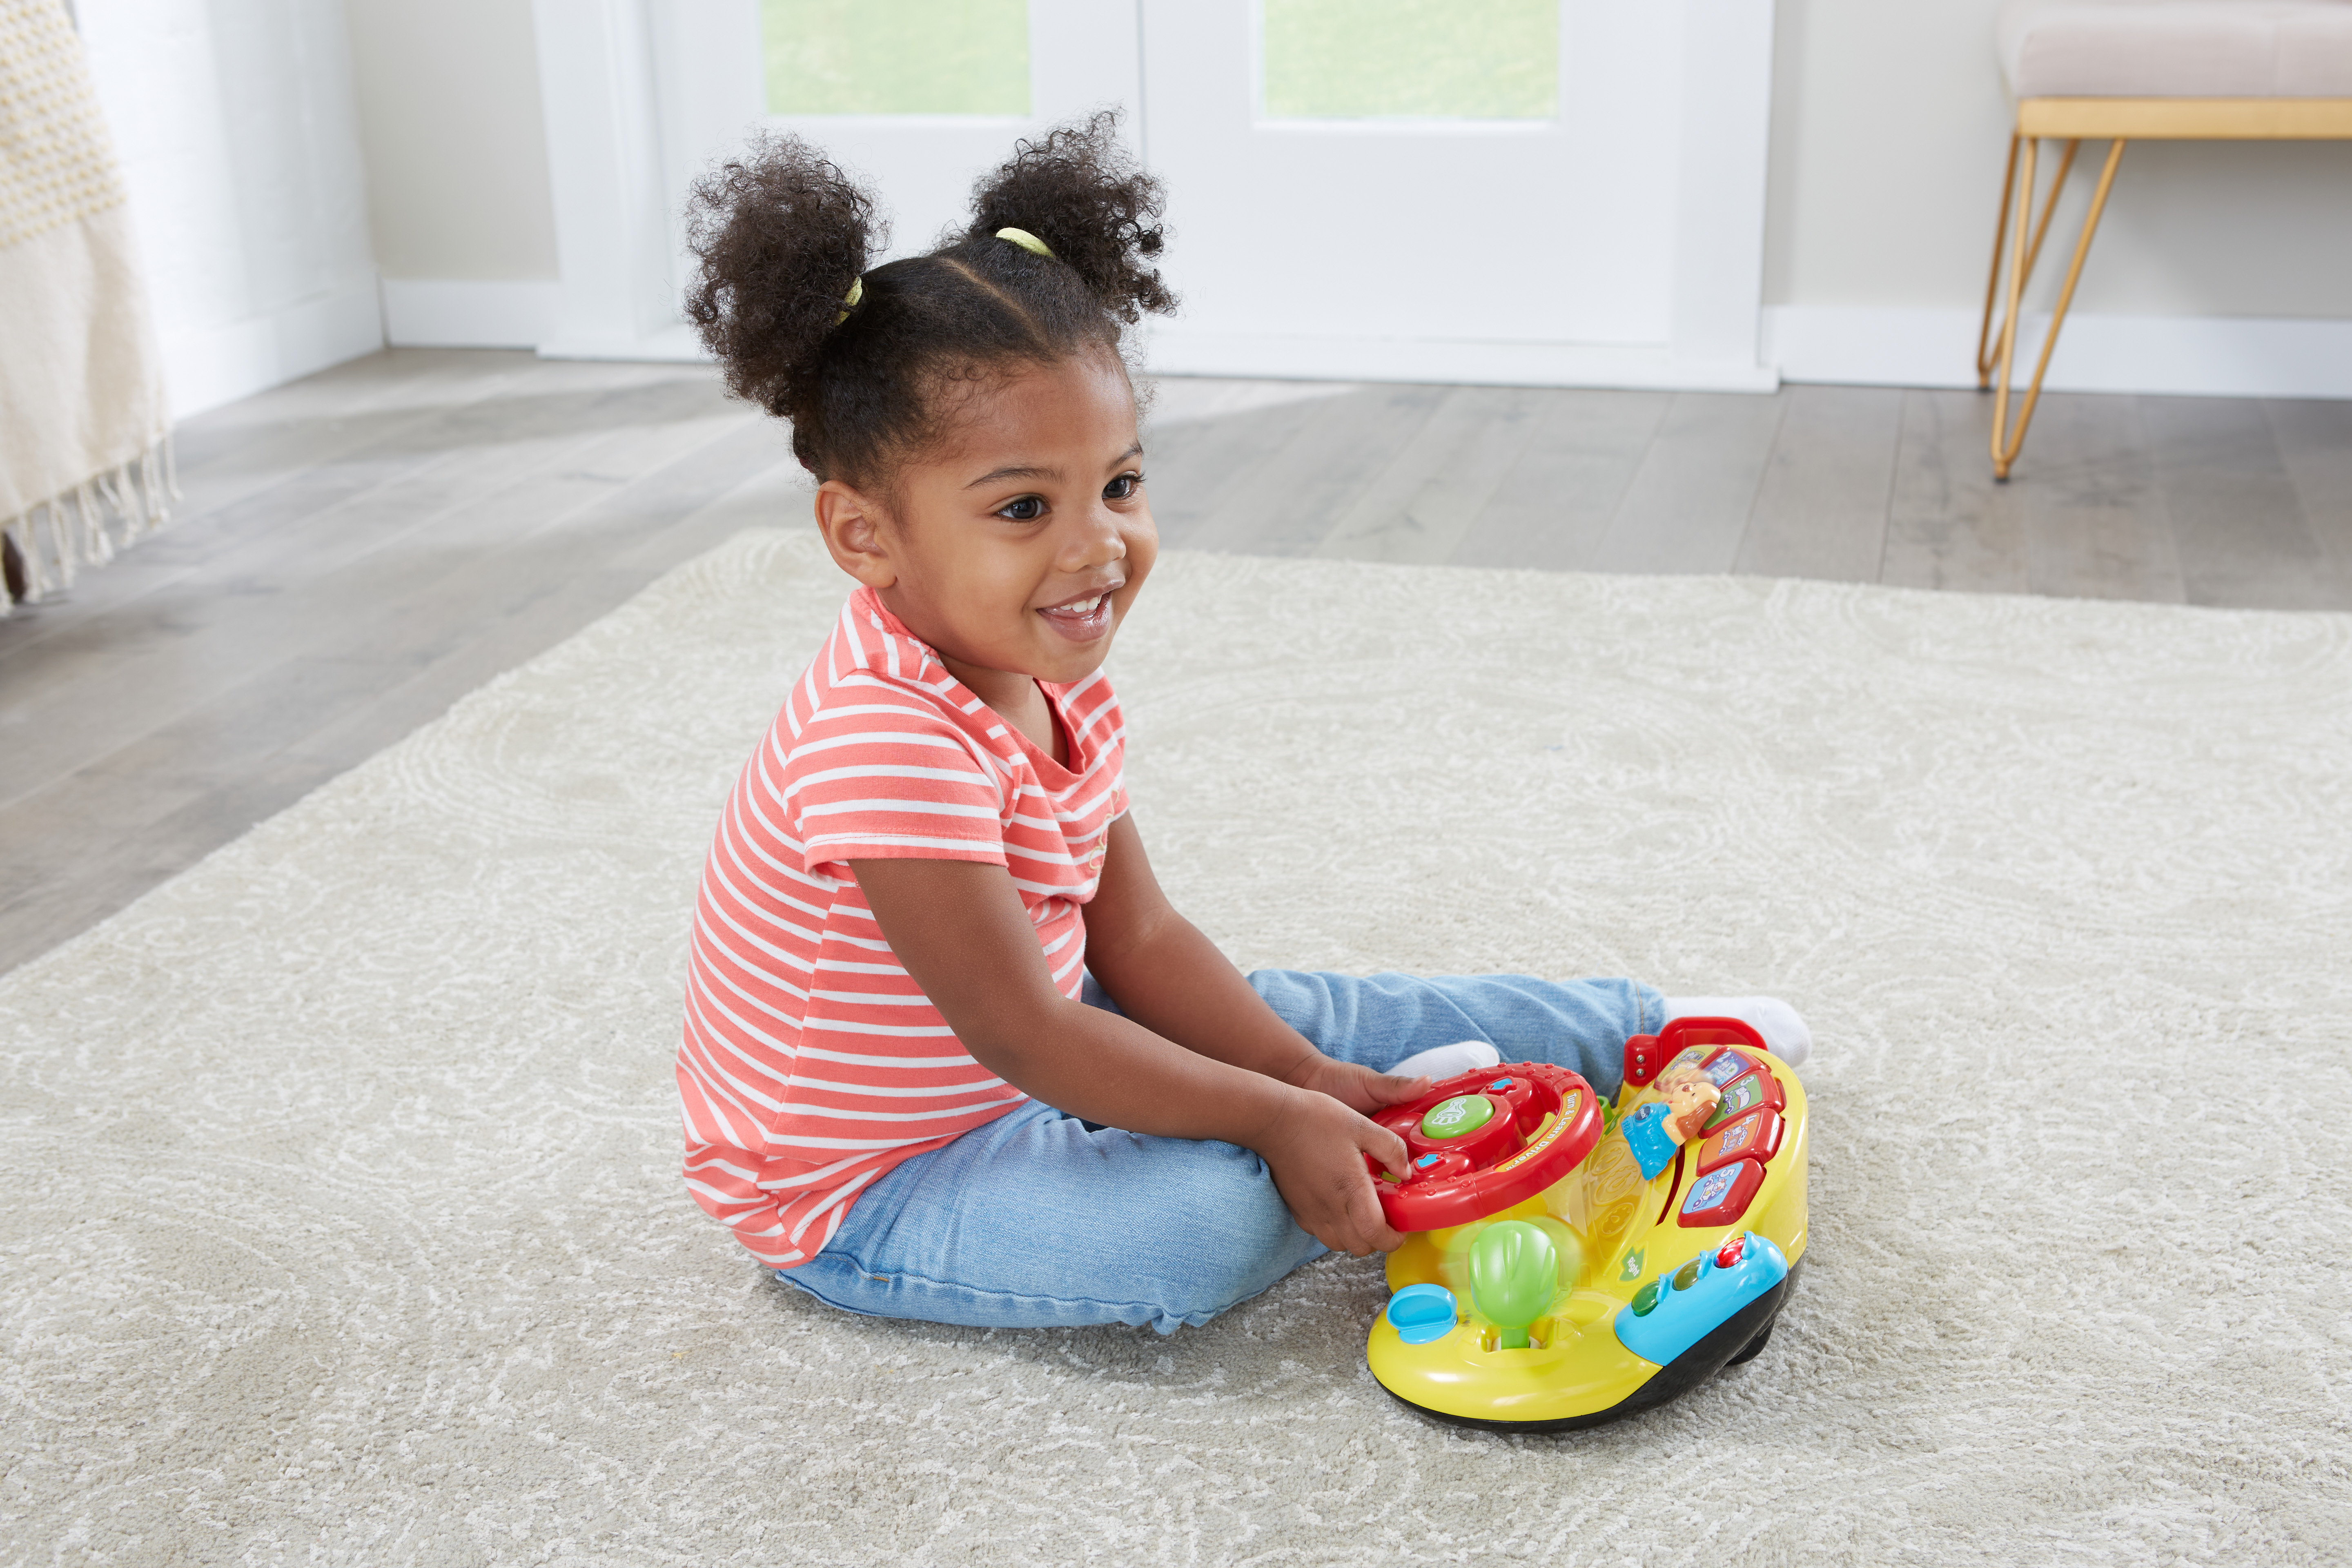 VTech Turn and Learn Driver, Role-Play Toy for Baby, Teaches Animals, Colors - image 4 of 8